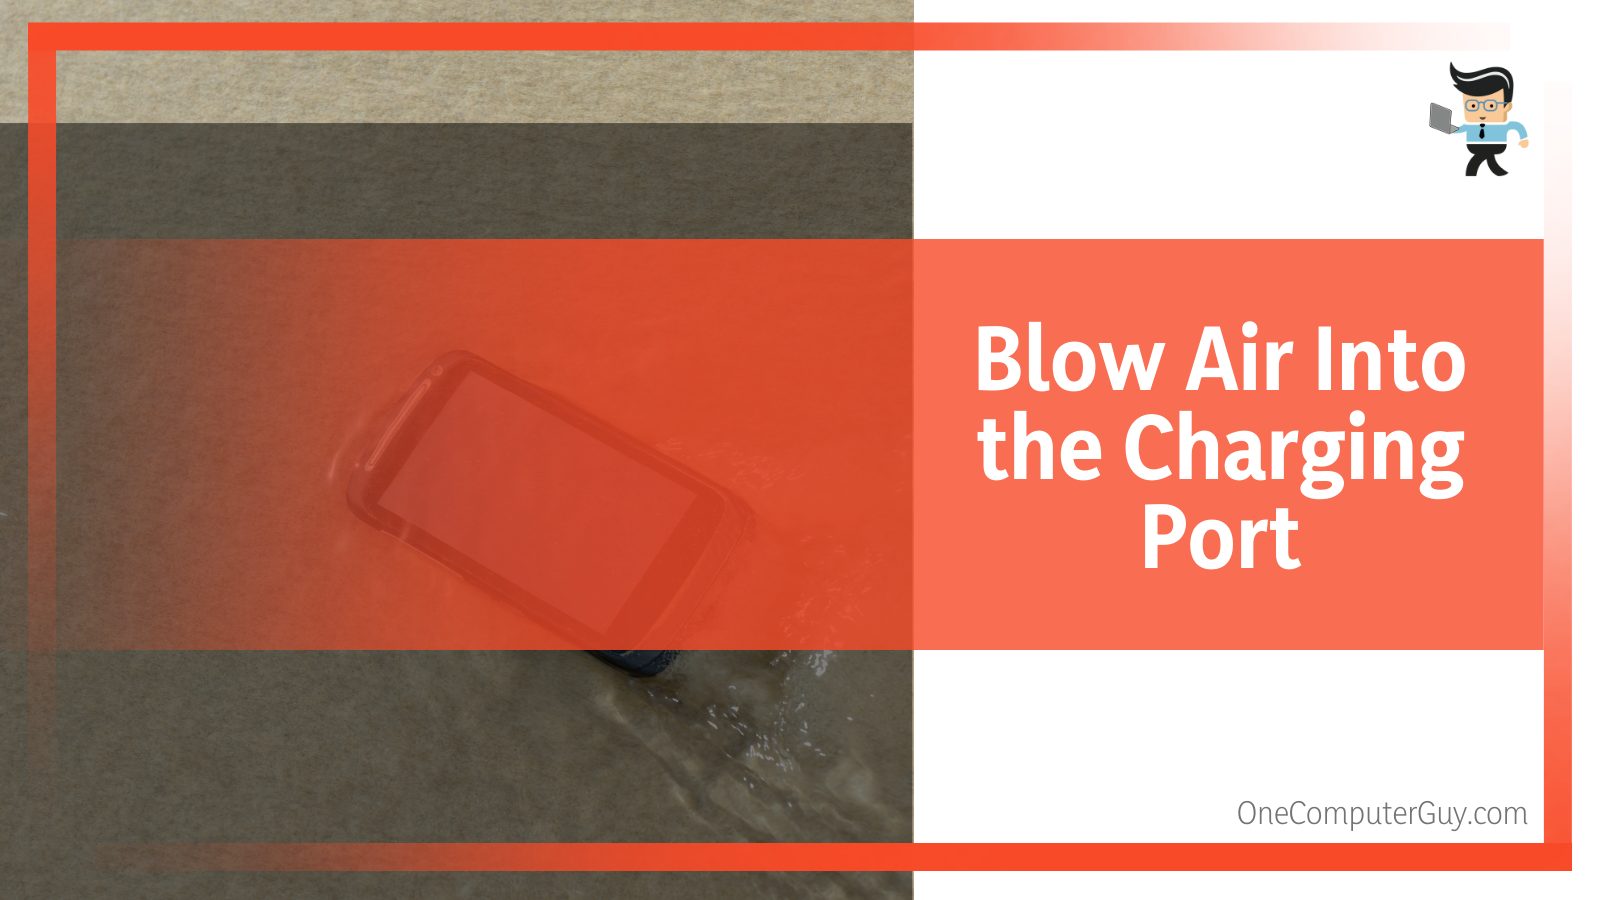 Blow Air Into the Charging Port